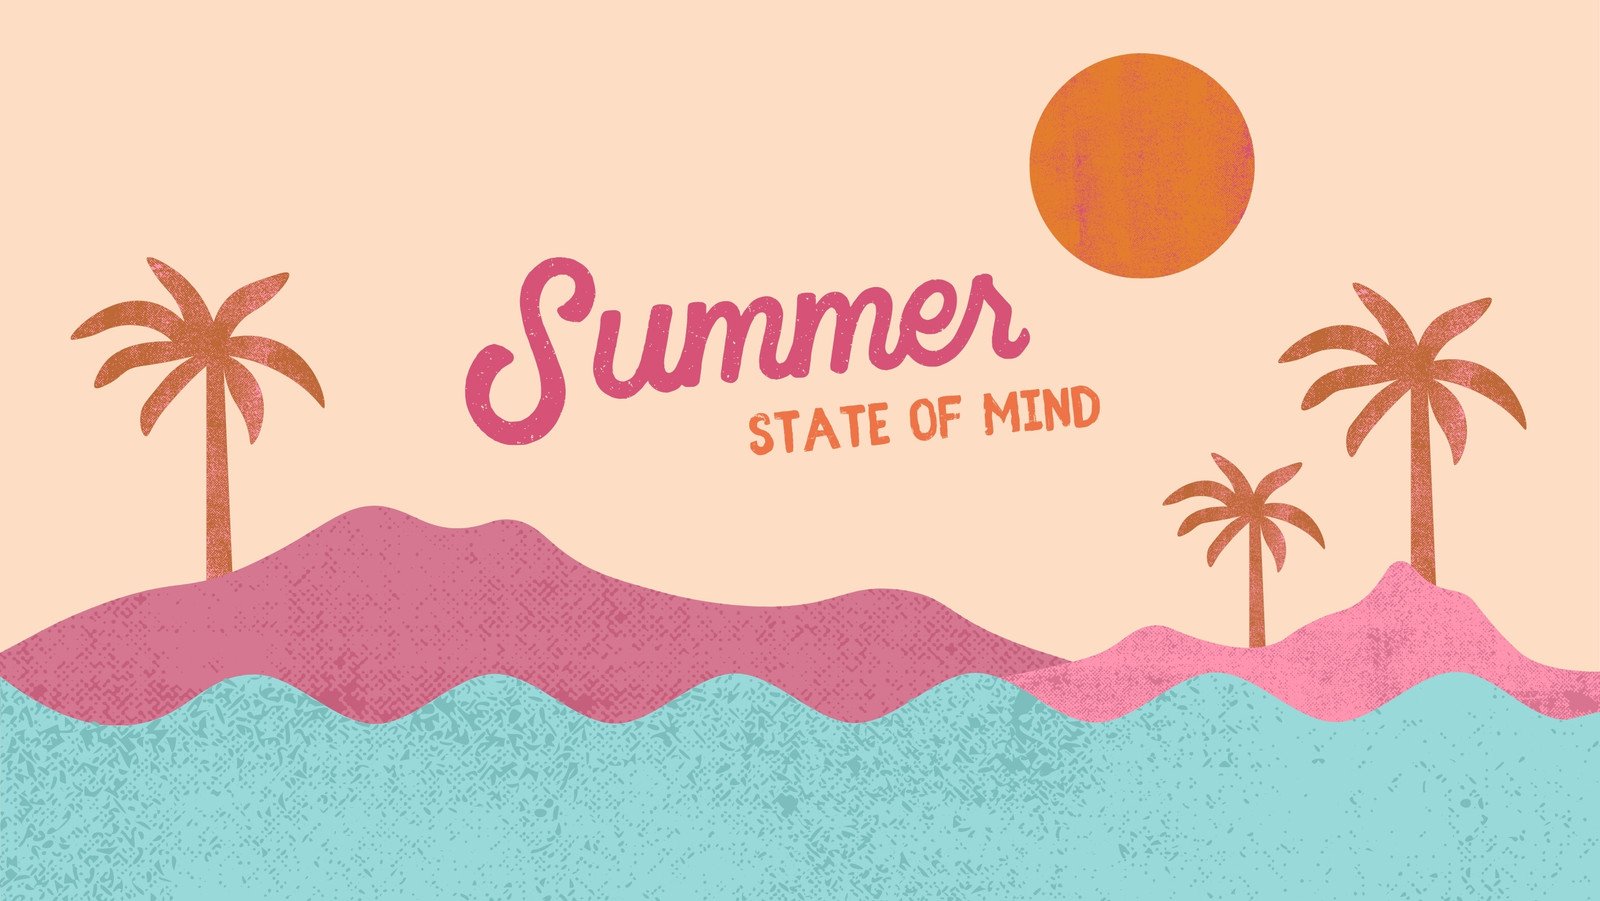 Free and customizable summer templates